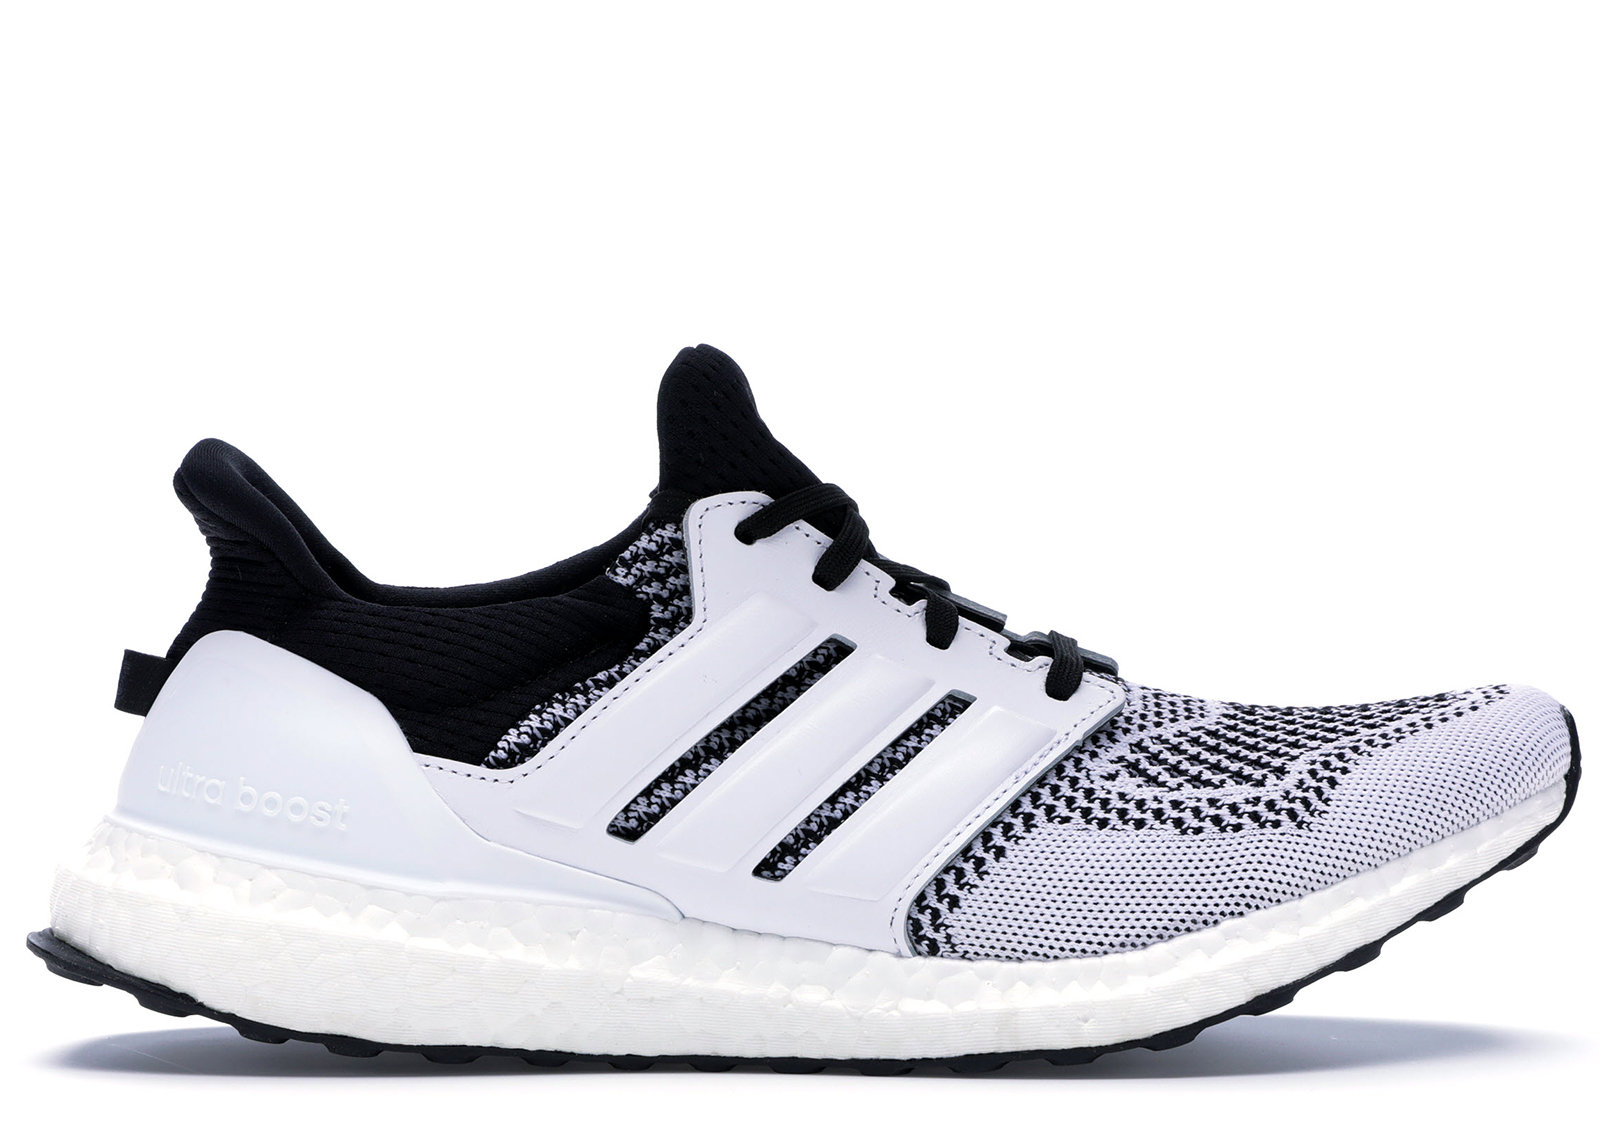 sns ultra boost collab